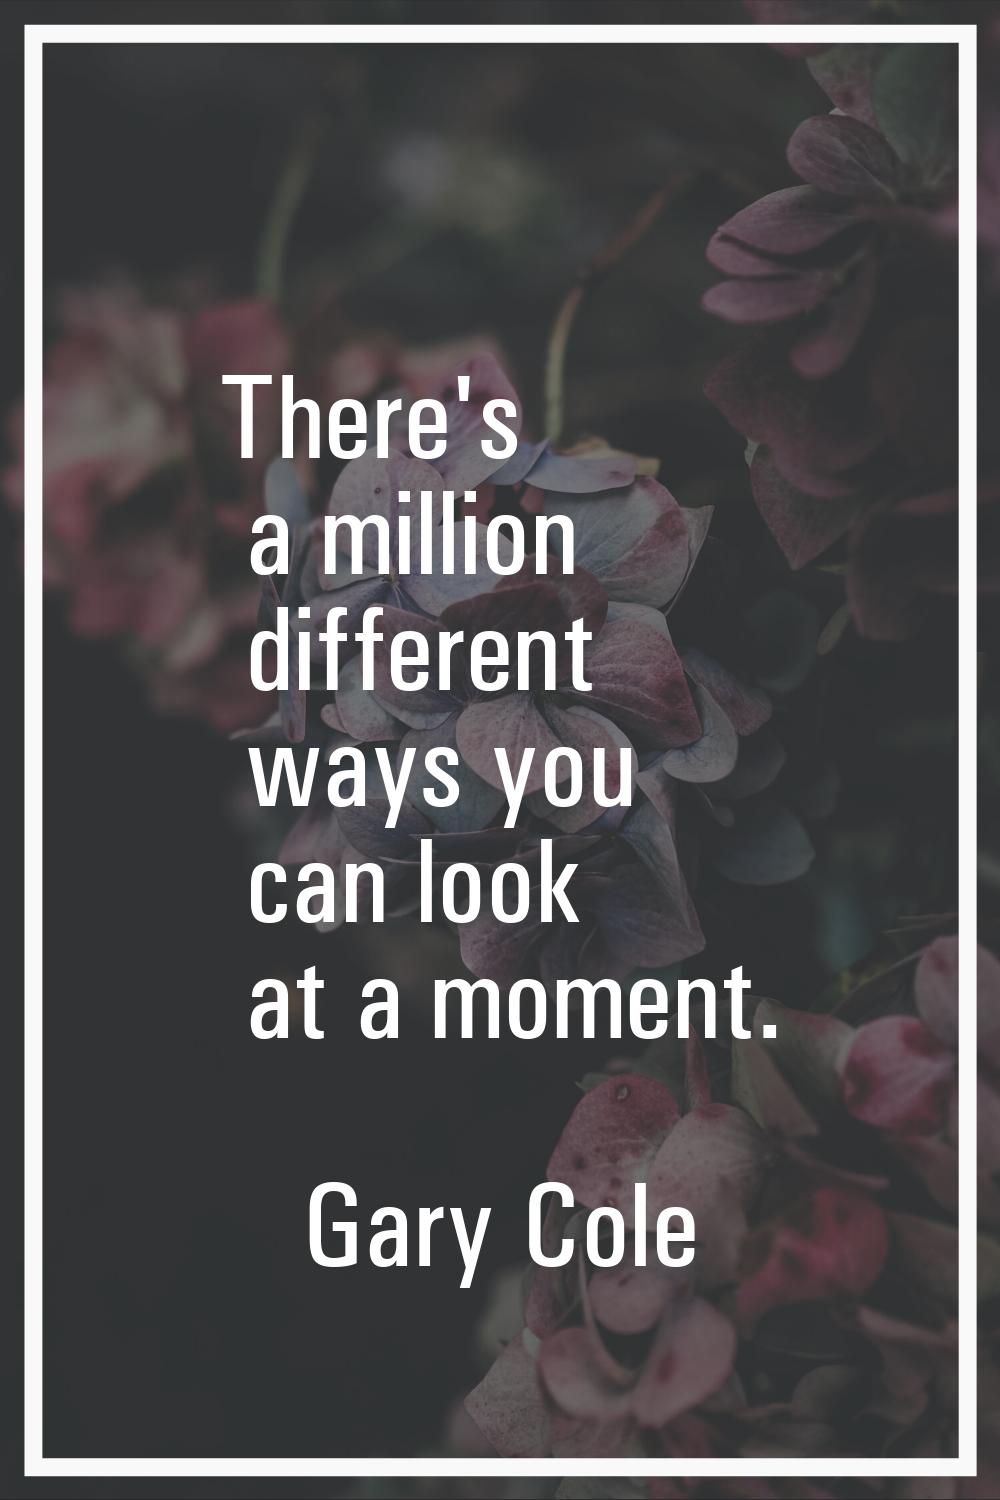 There's a million different ways you can look at a moment.